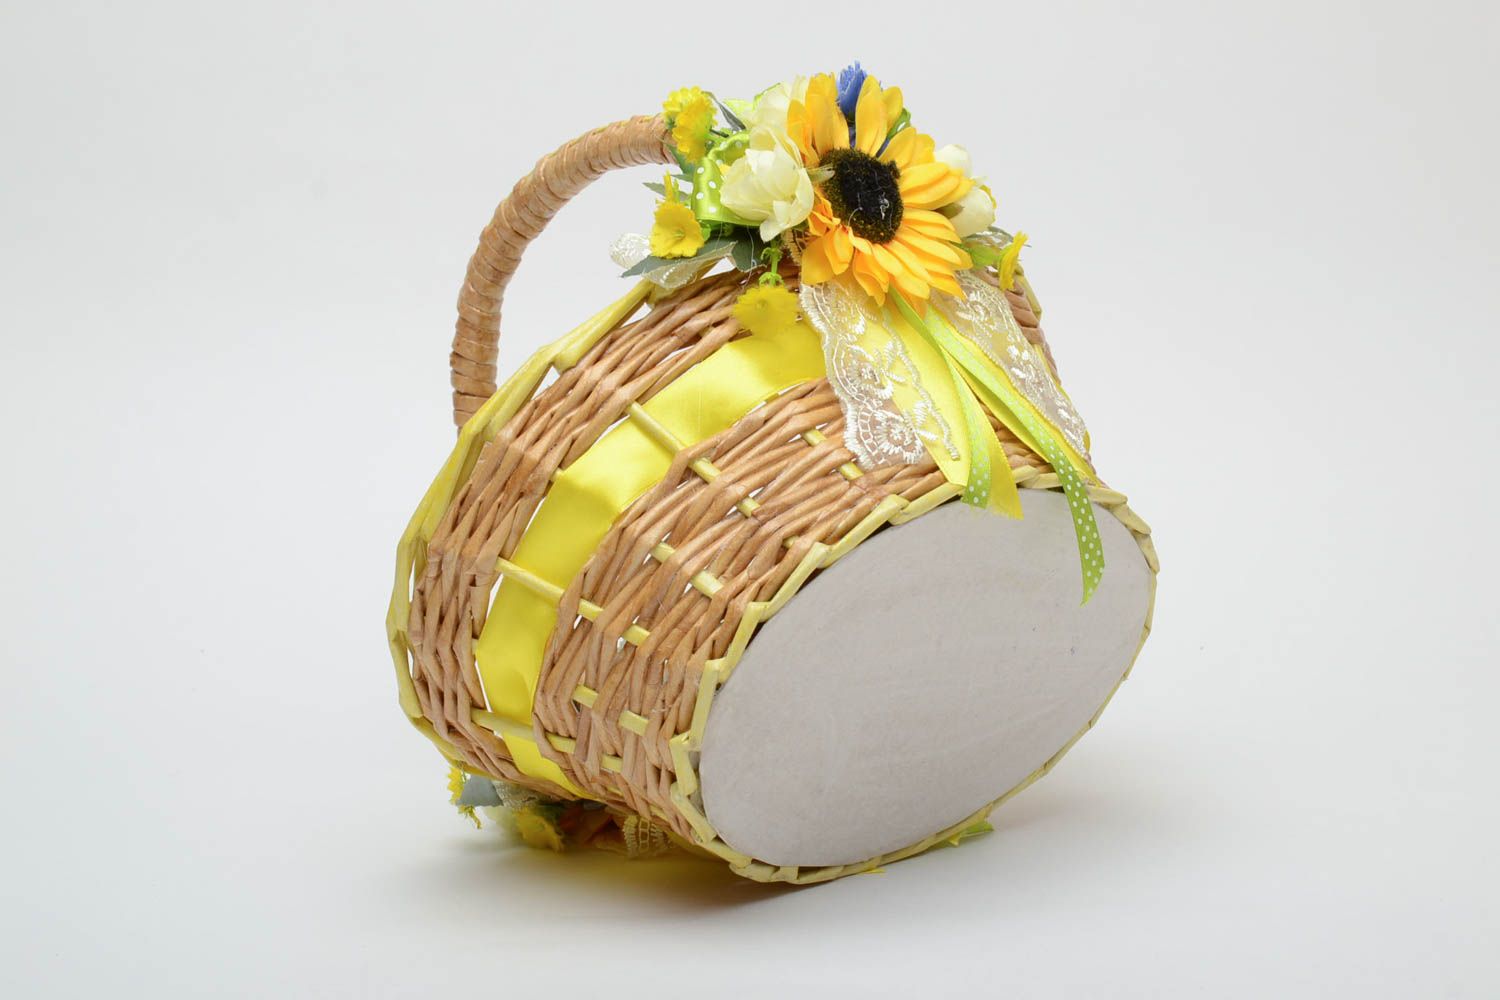 Newspaper basket with artificial flowers photo 4